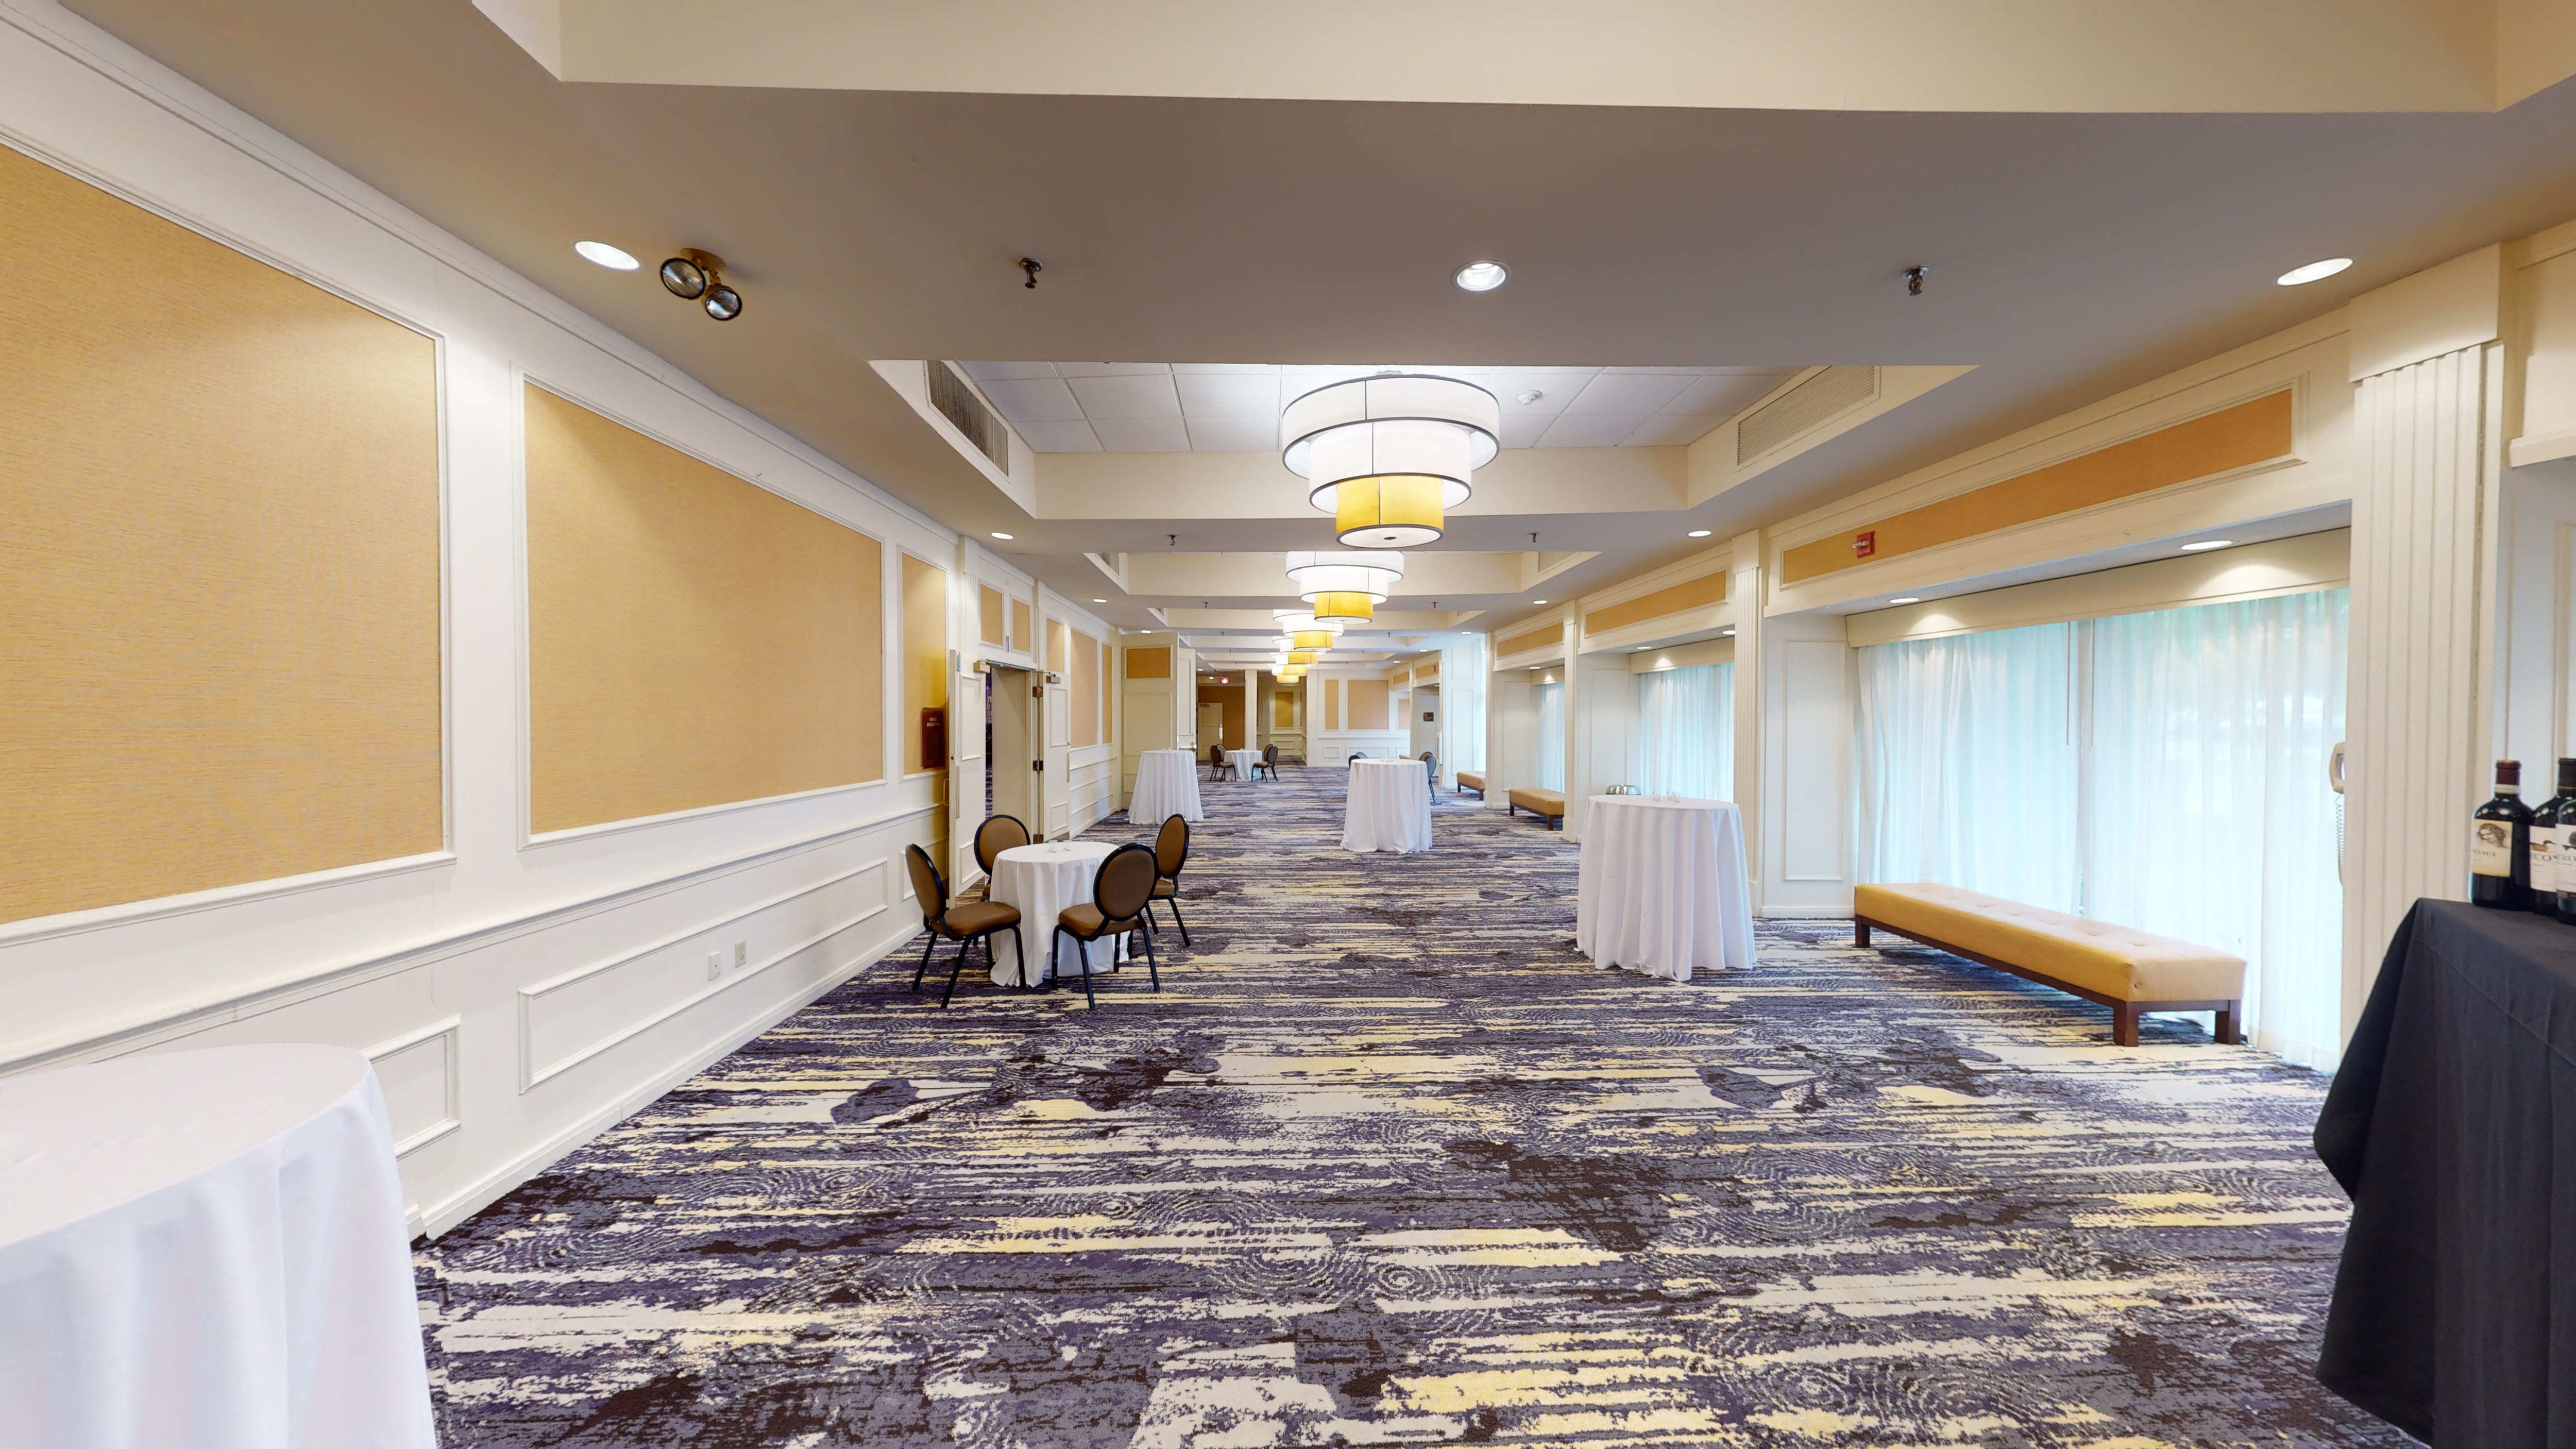 Ballroom Foyer Area with seating